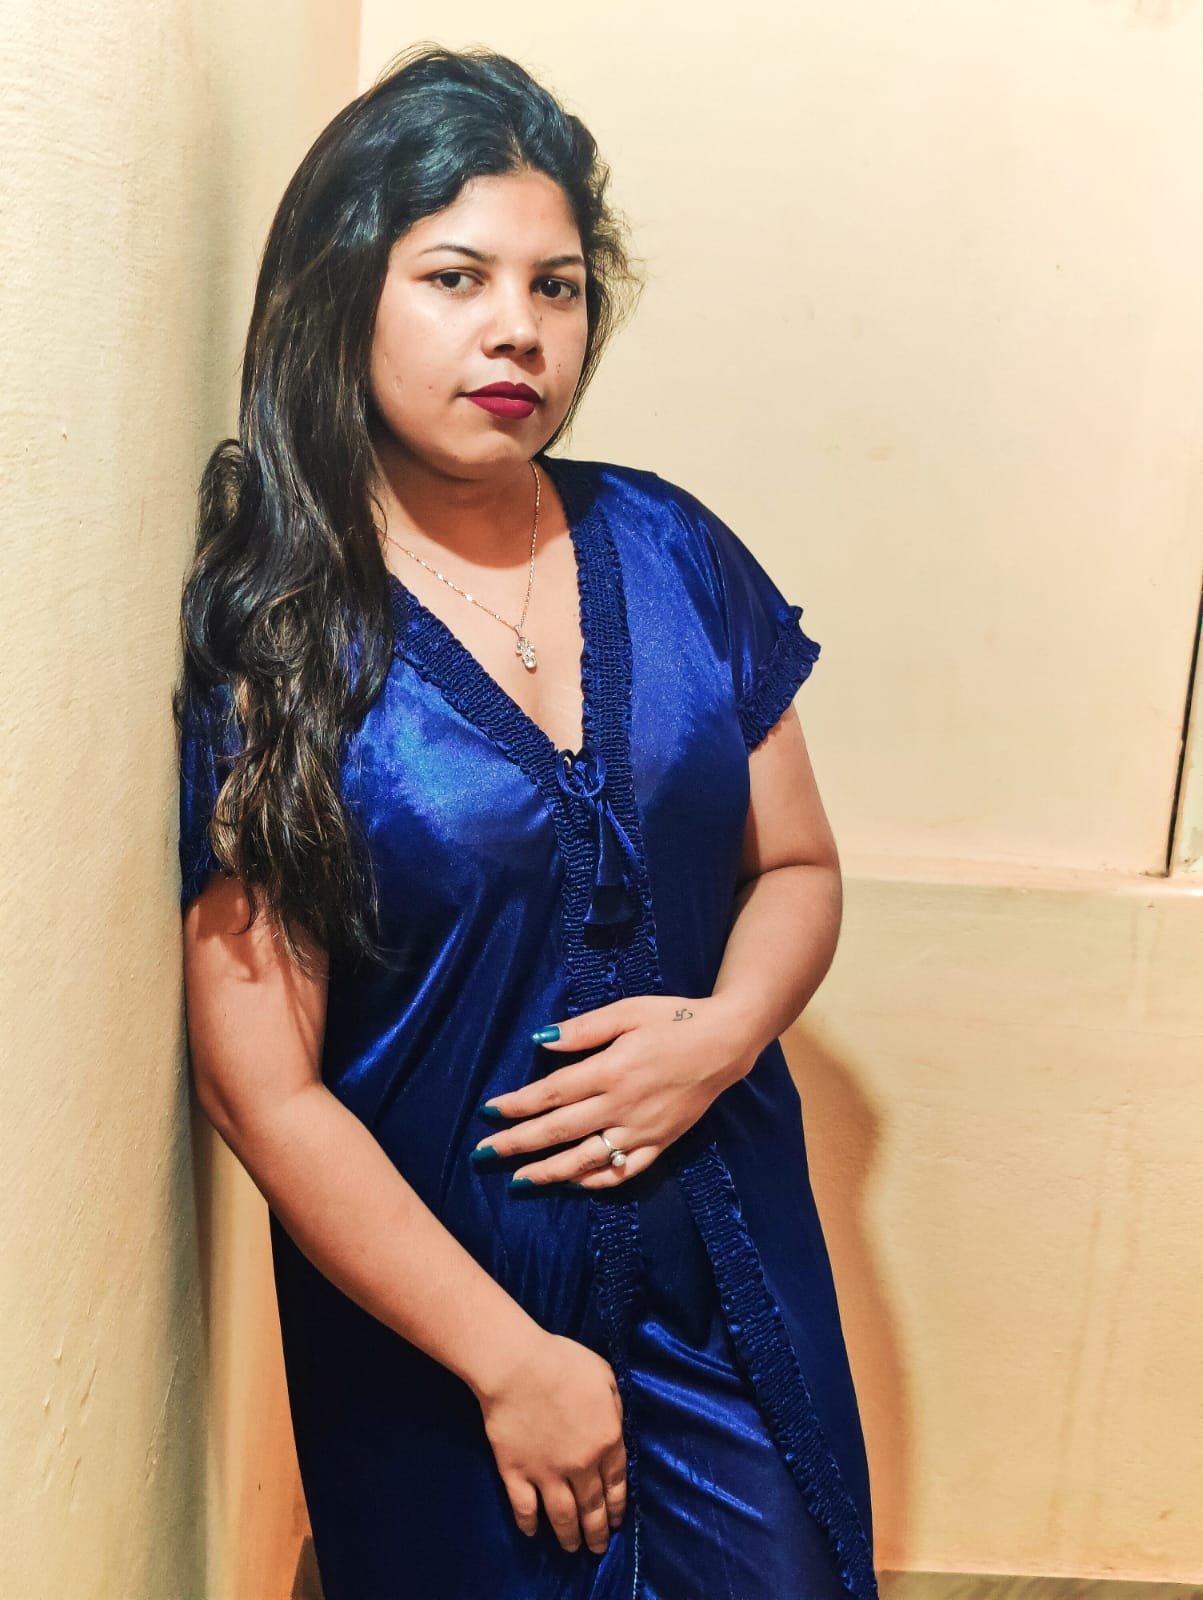 housewifes for sex bangalore